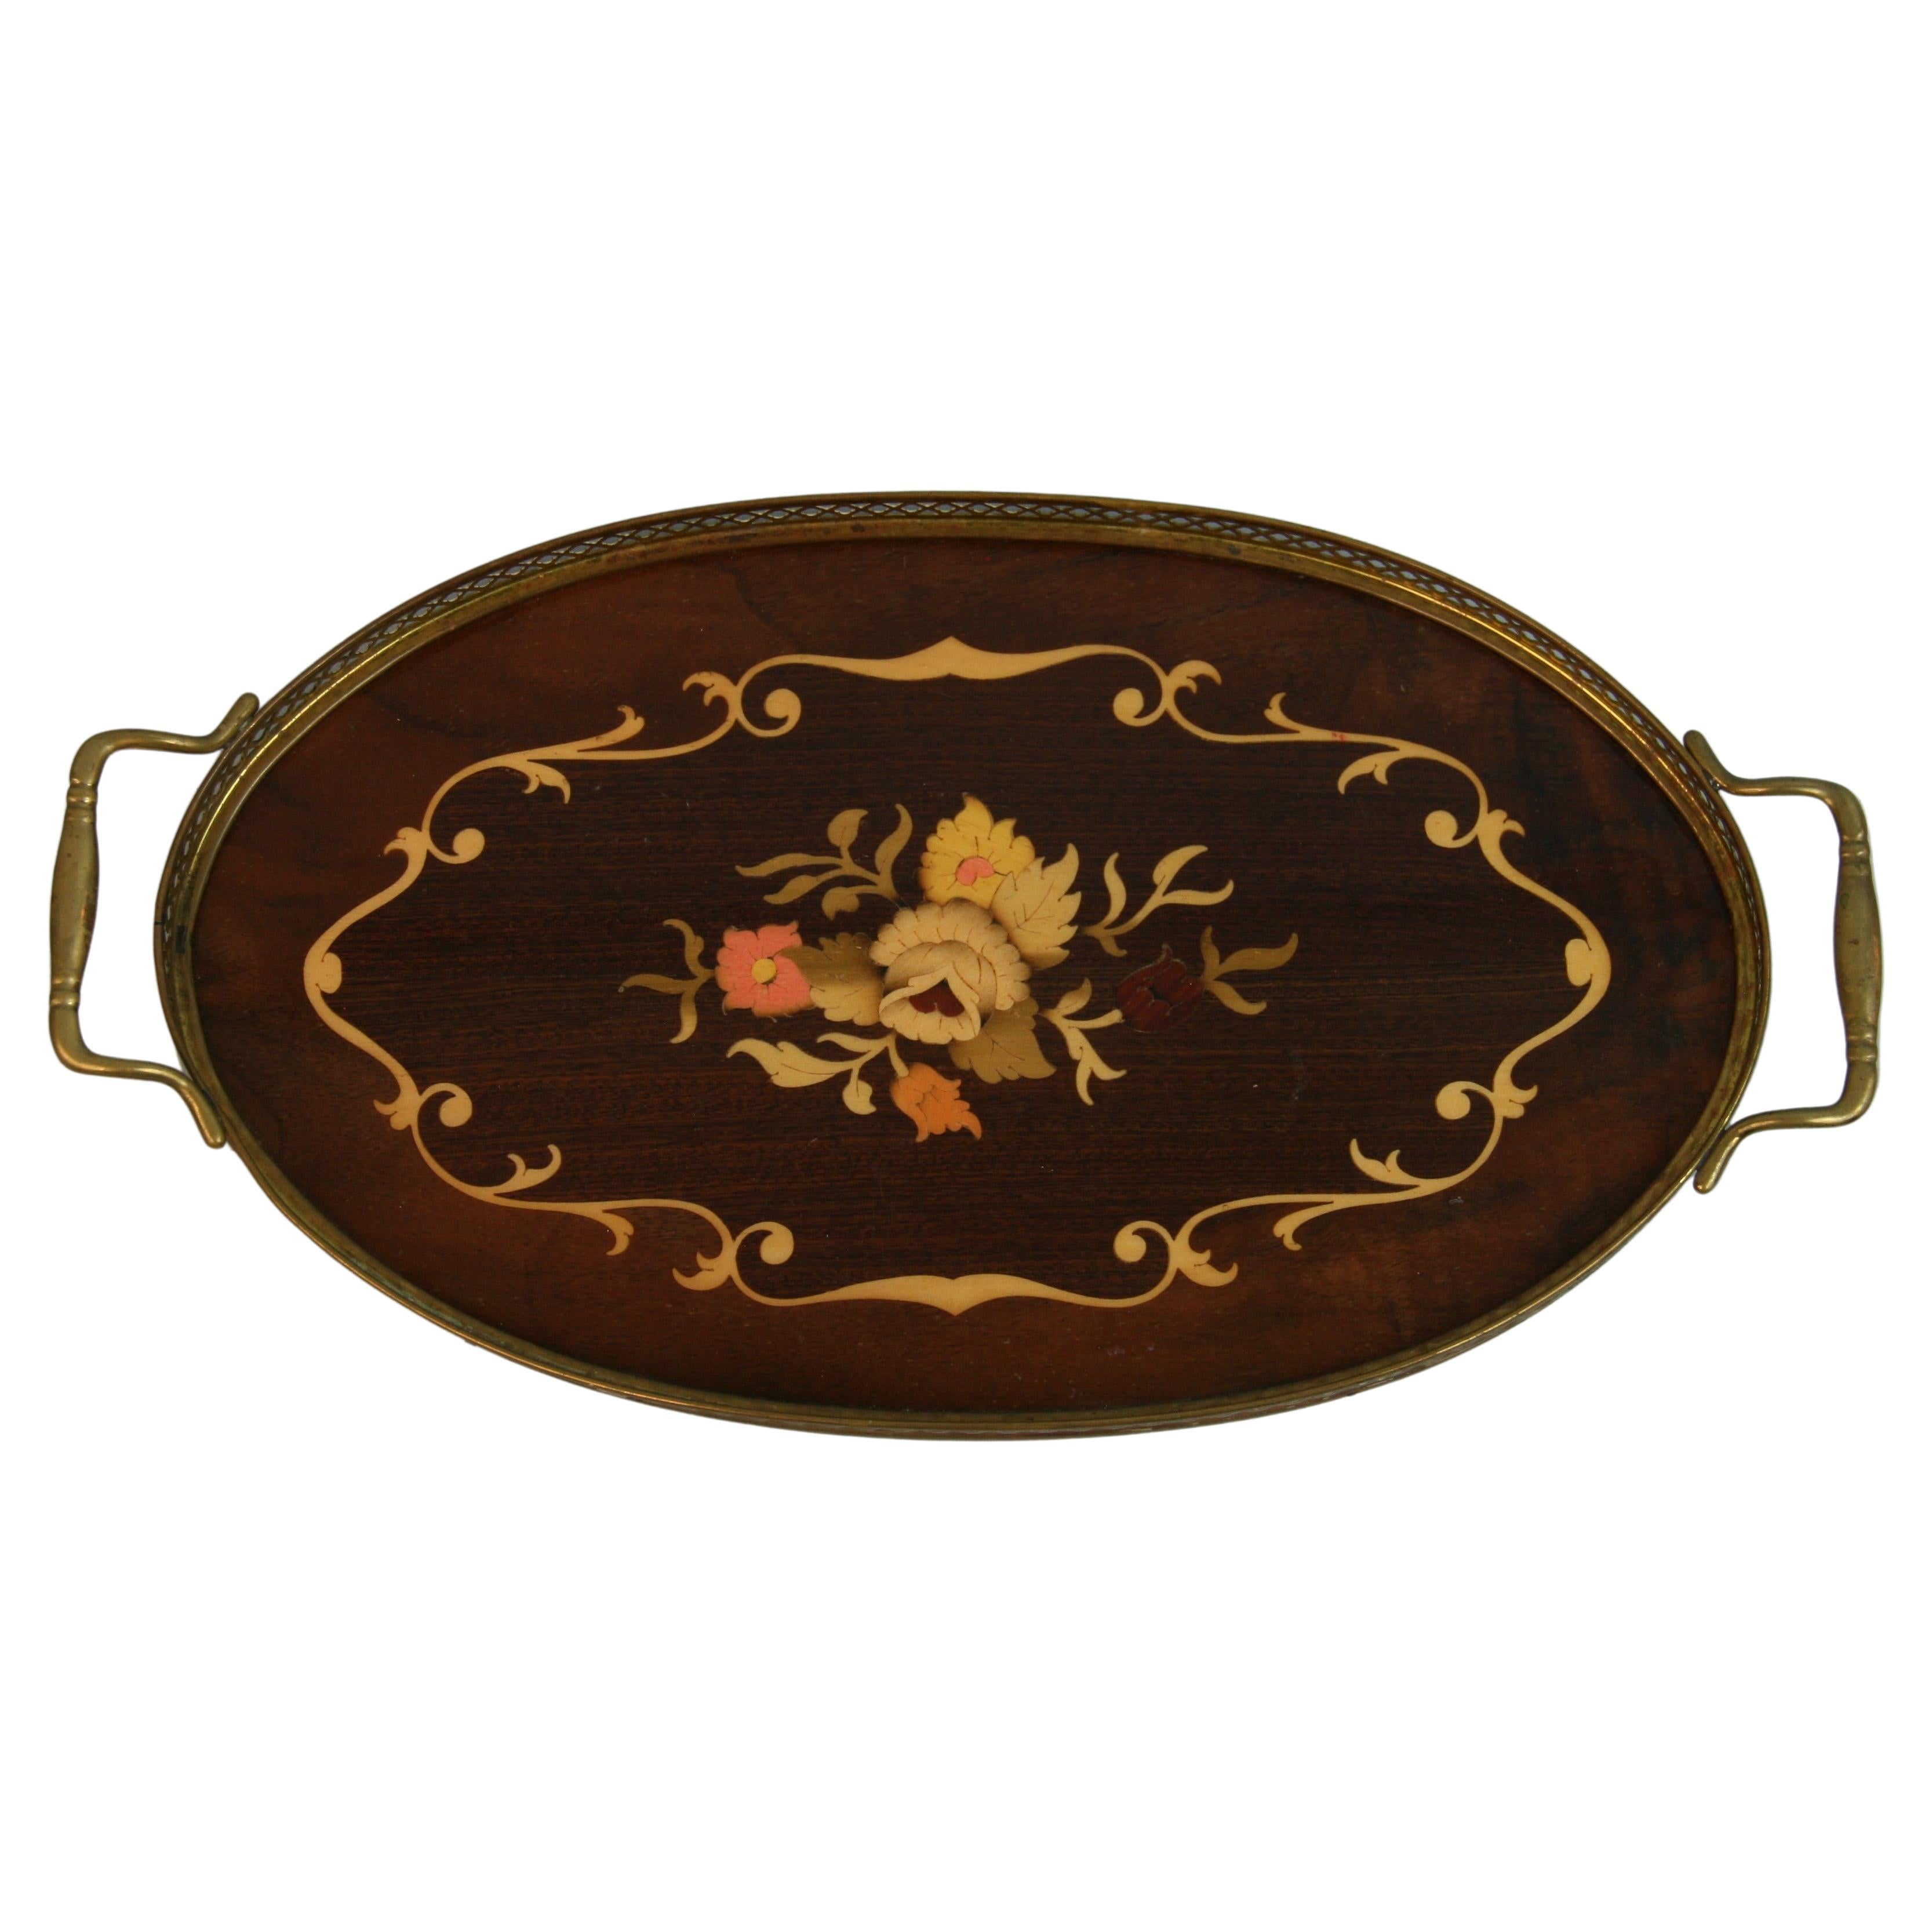 Italian Serving Tray Inlaid Wood Brass Rim and Handles, 1960's